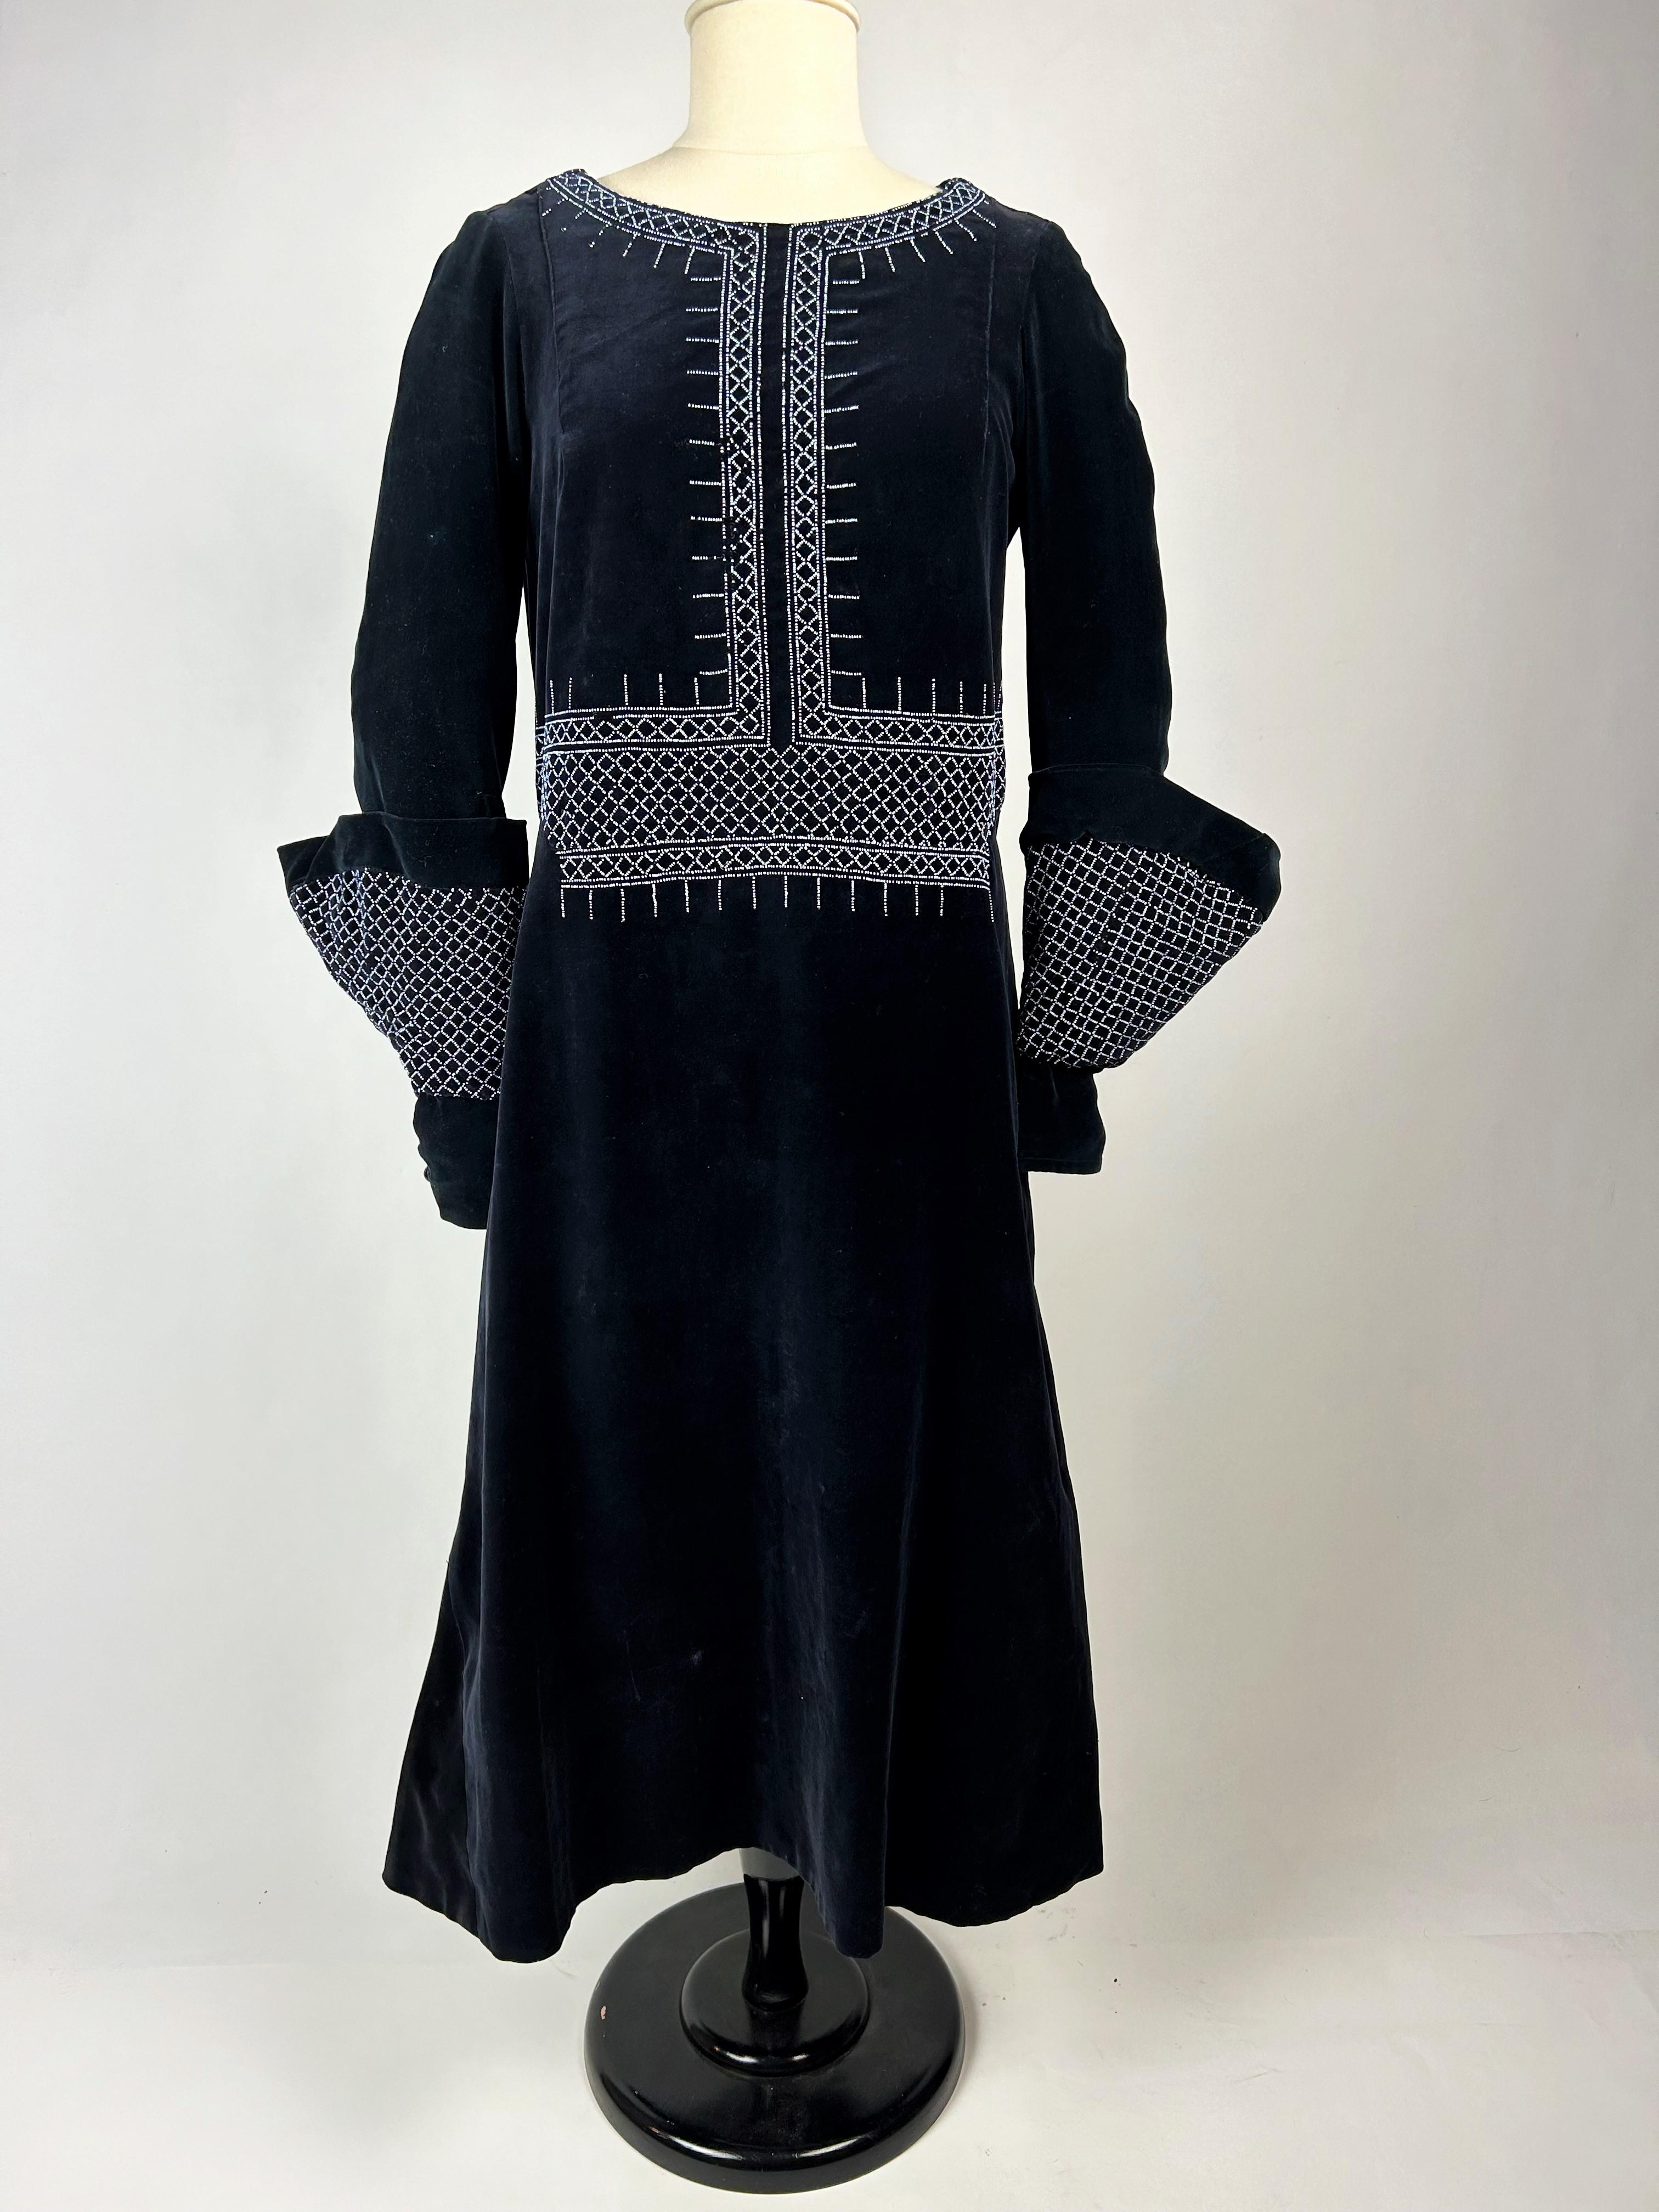 A Navy Velvet Sac Dress with glass beads embroideries - France Circa 1925-1930 For Sale 2